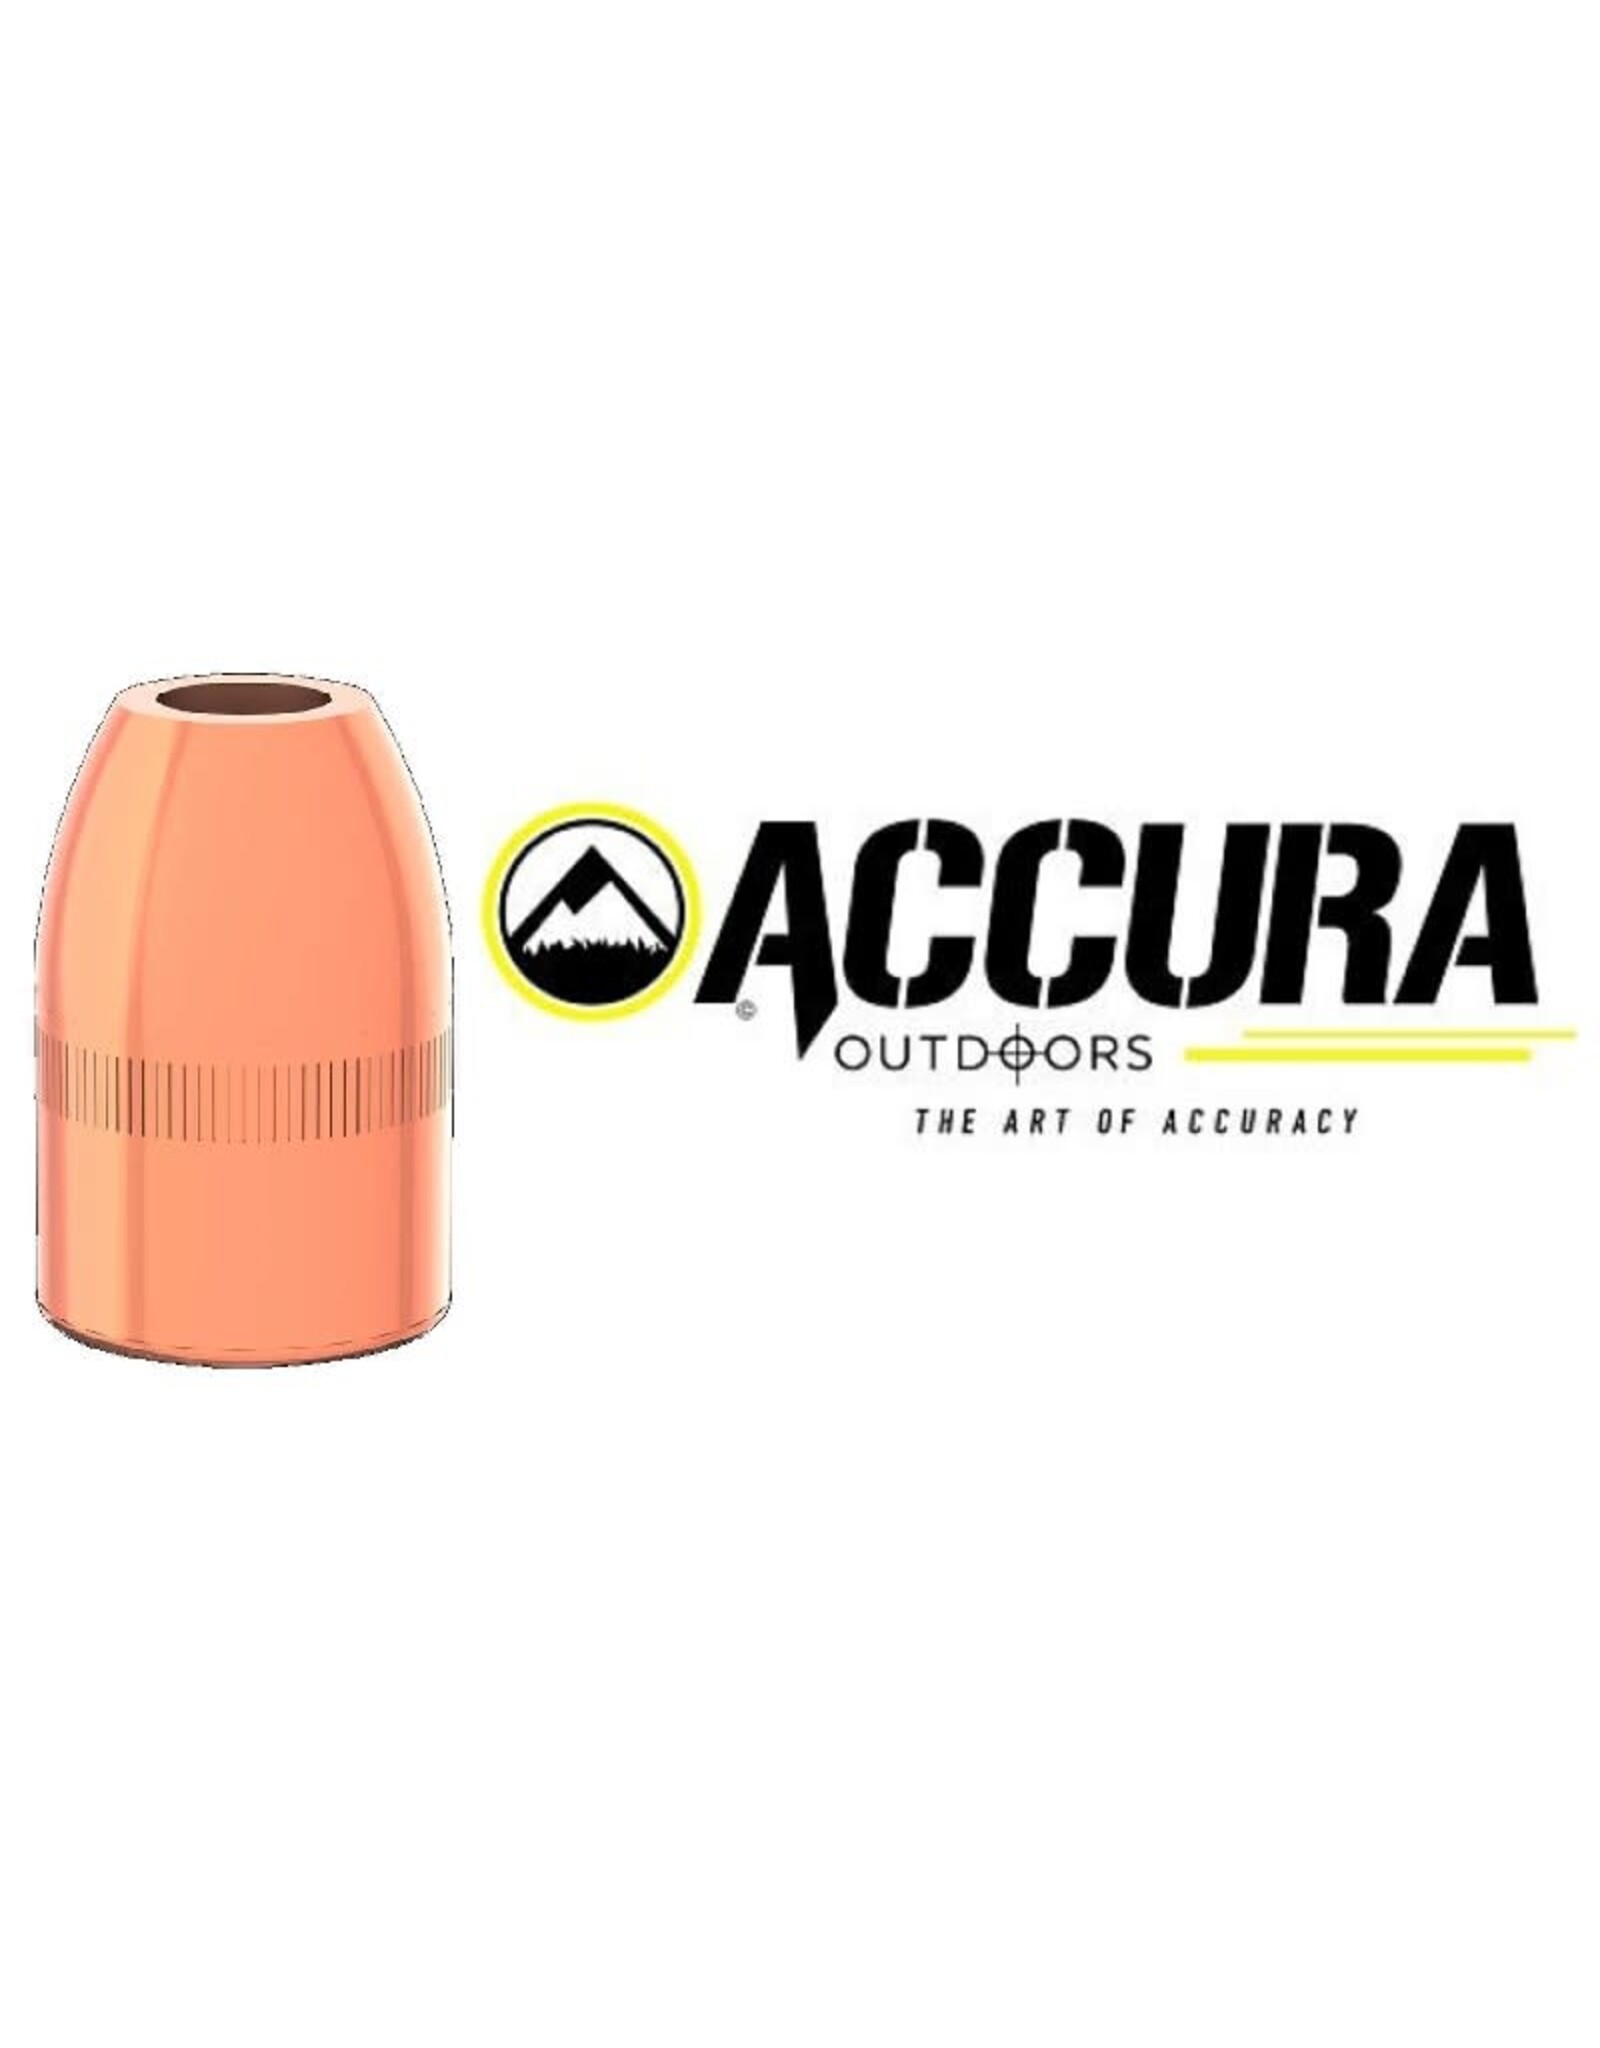 Accura Accura Bullets .38 Cal 125 GR Hollow Point (.357")  - 500 Count